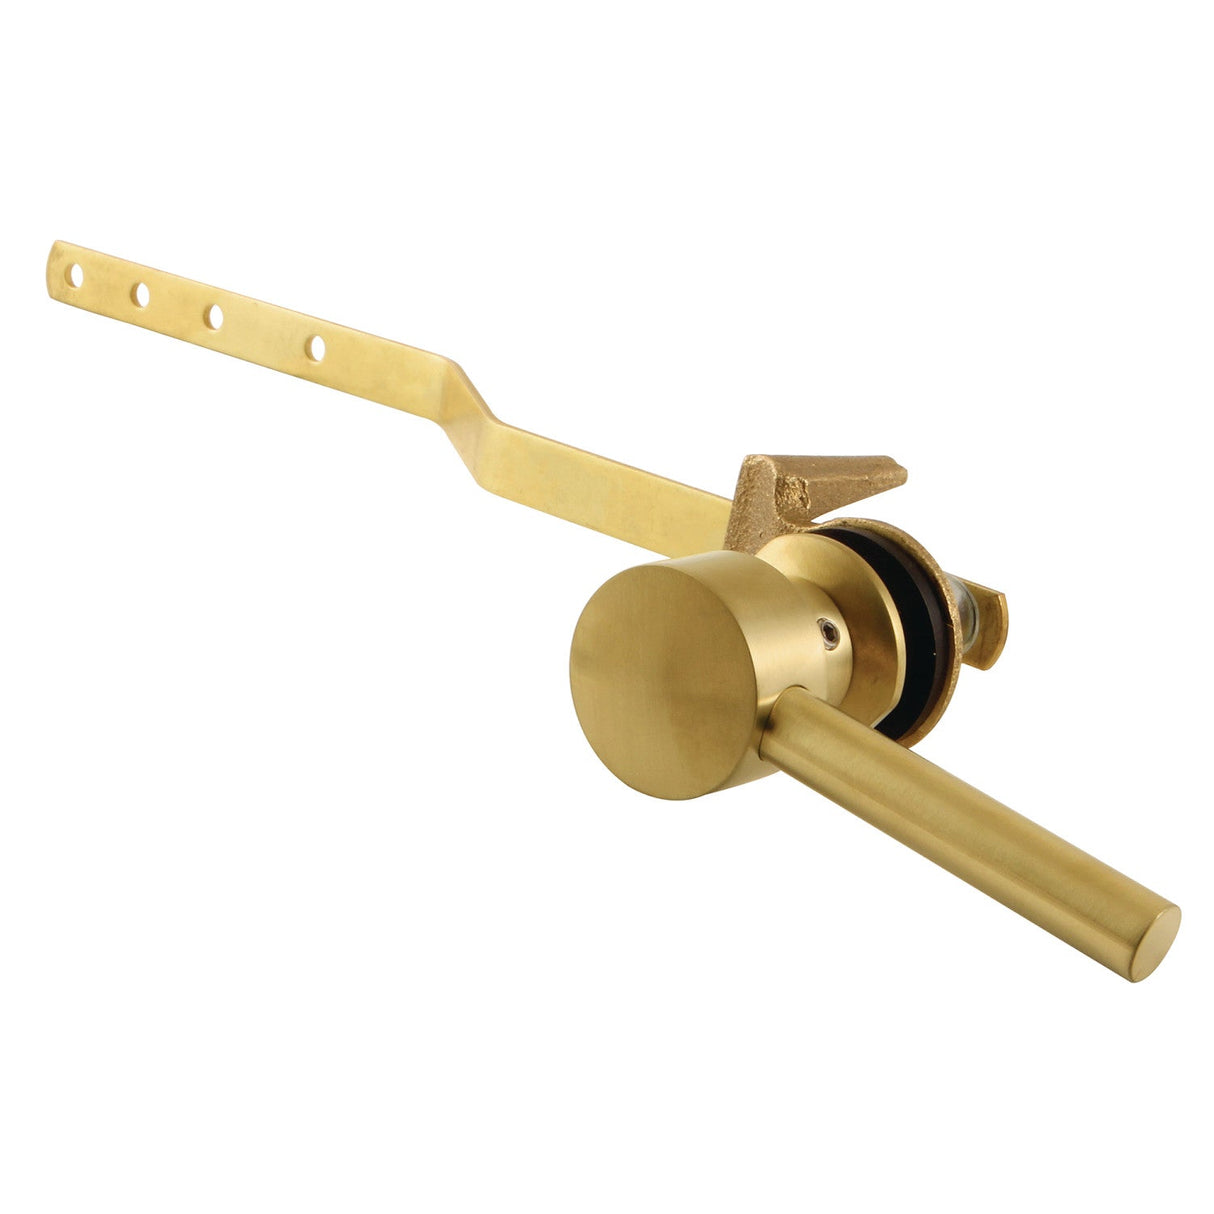 Concord KTDL7 Front Mount Toilet Tank Lever, Brushed Brass